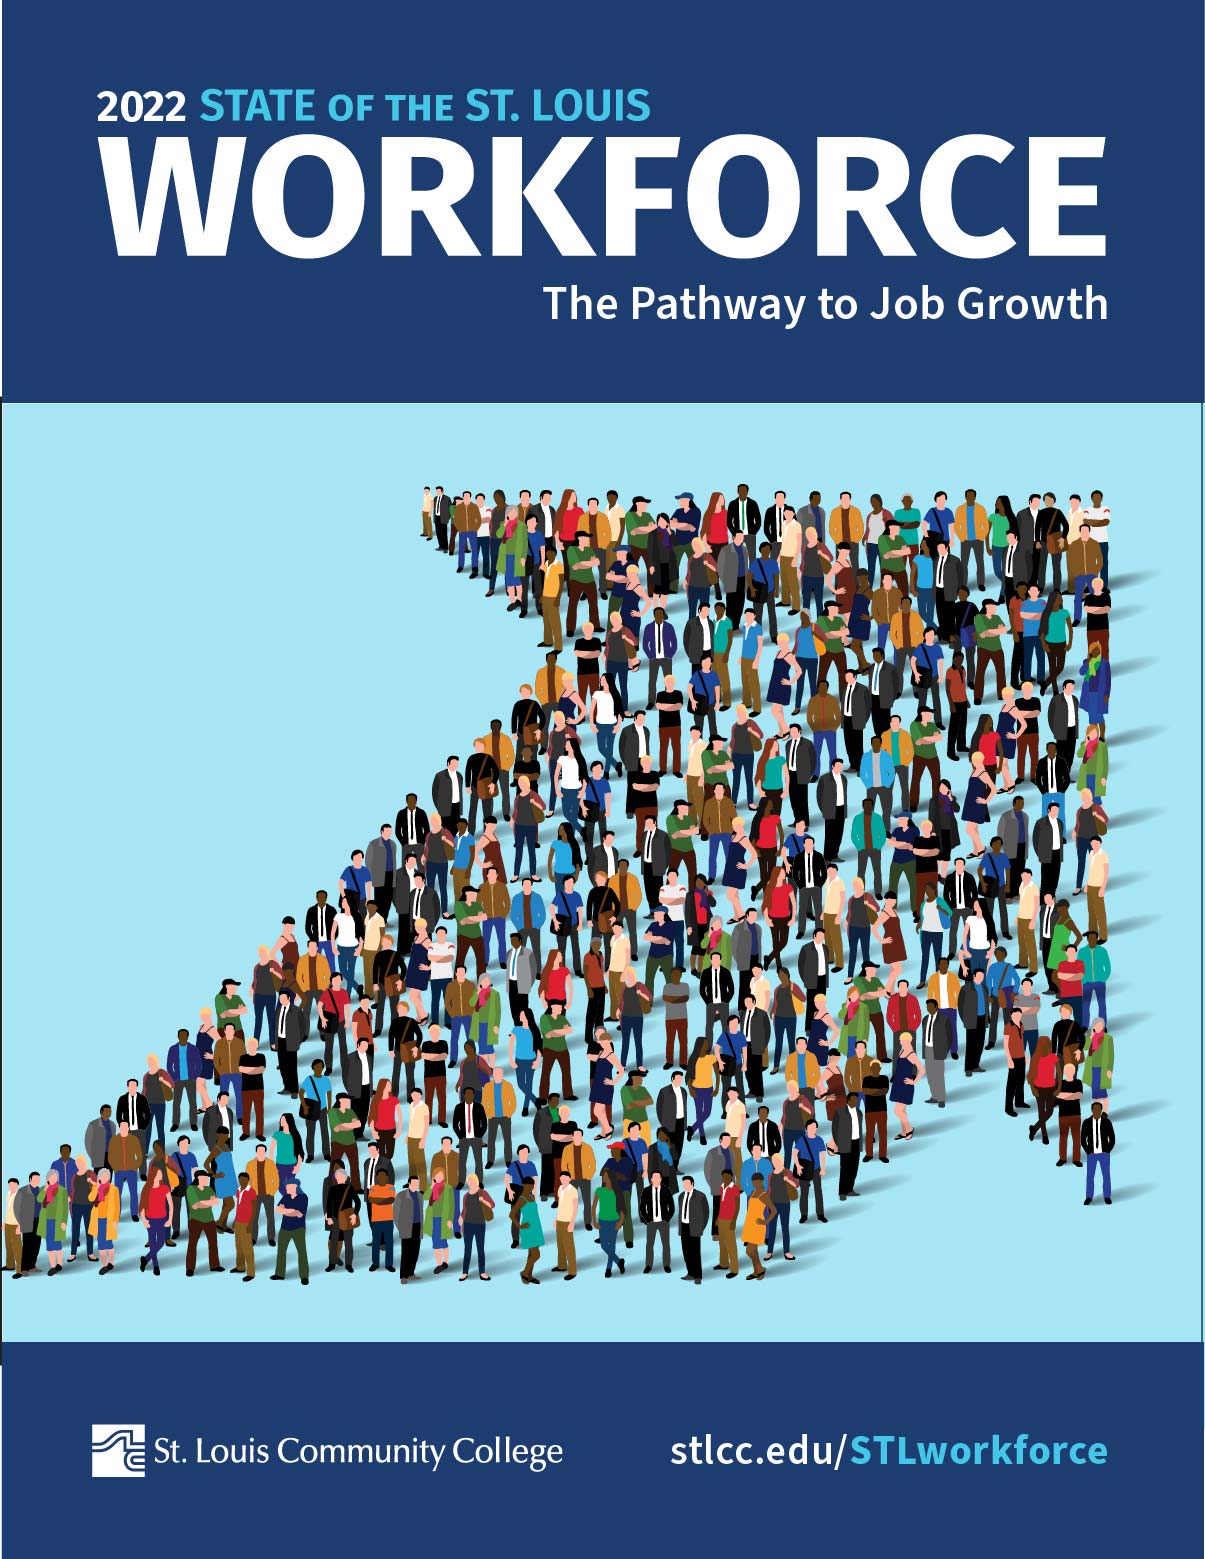 State of the St. Louis Workforce report